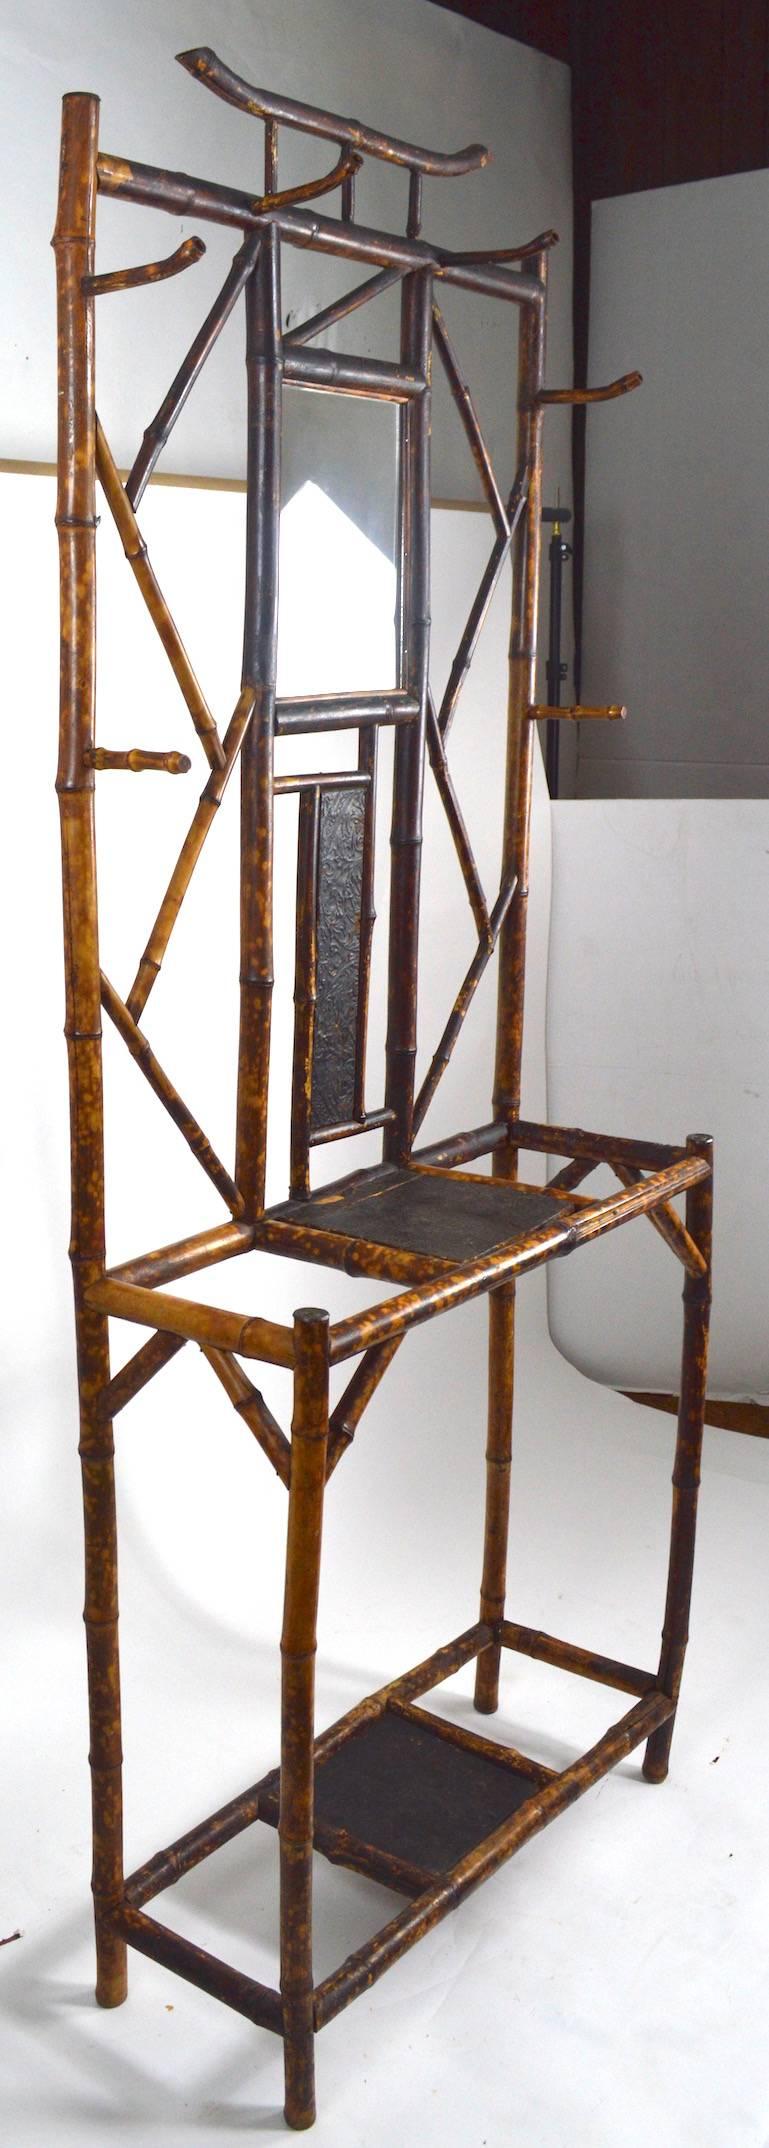 English Victorian bamboo hall rack, functions as a coat rack and umbrella, cane stand. The top center panel is a mirror, the other panels are embossed wood, the frame is bamboo. Height to shelf 34